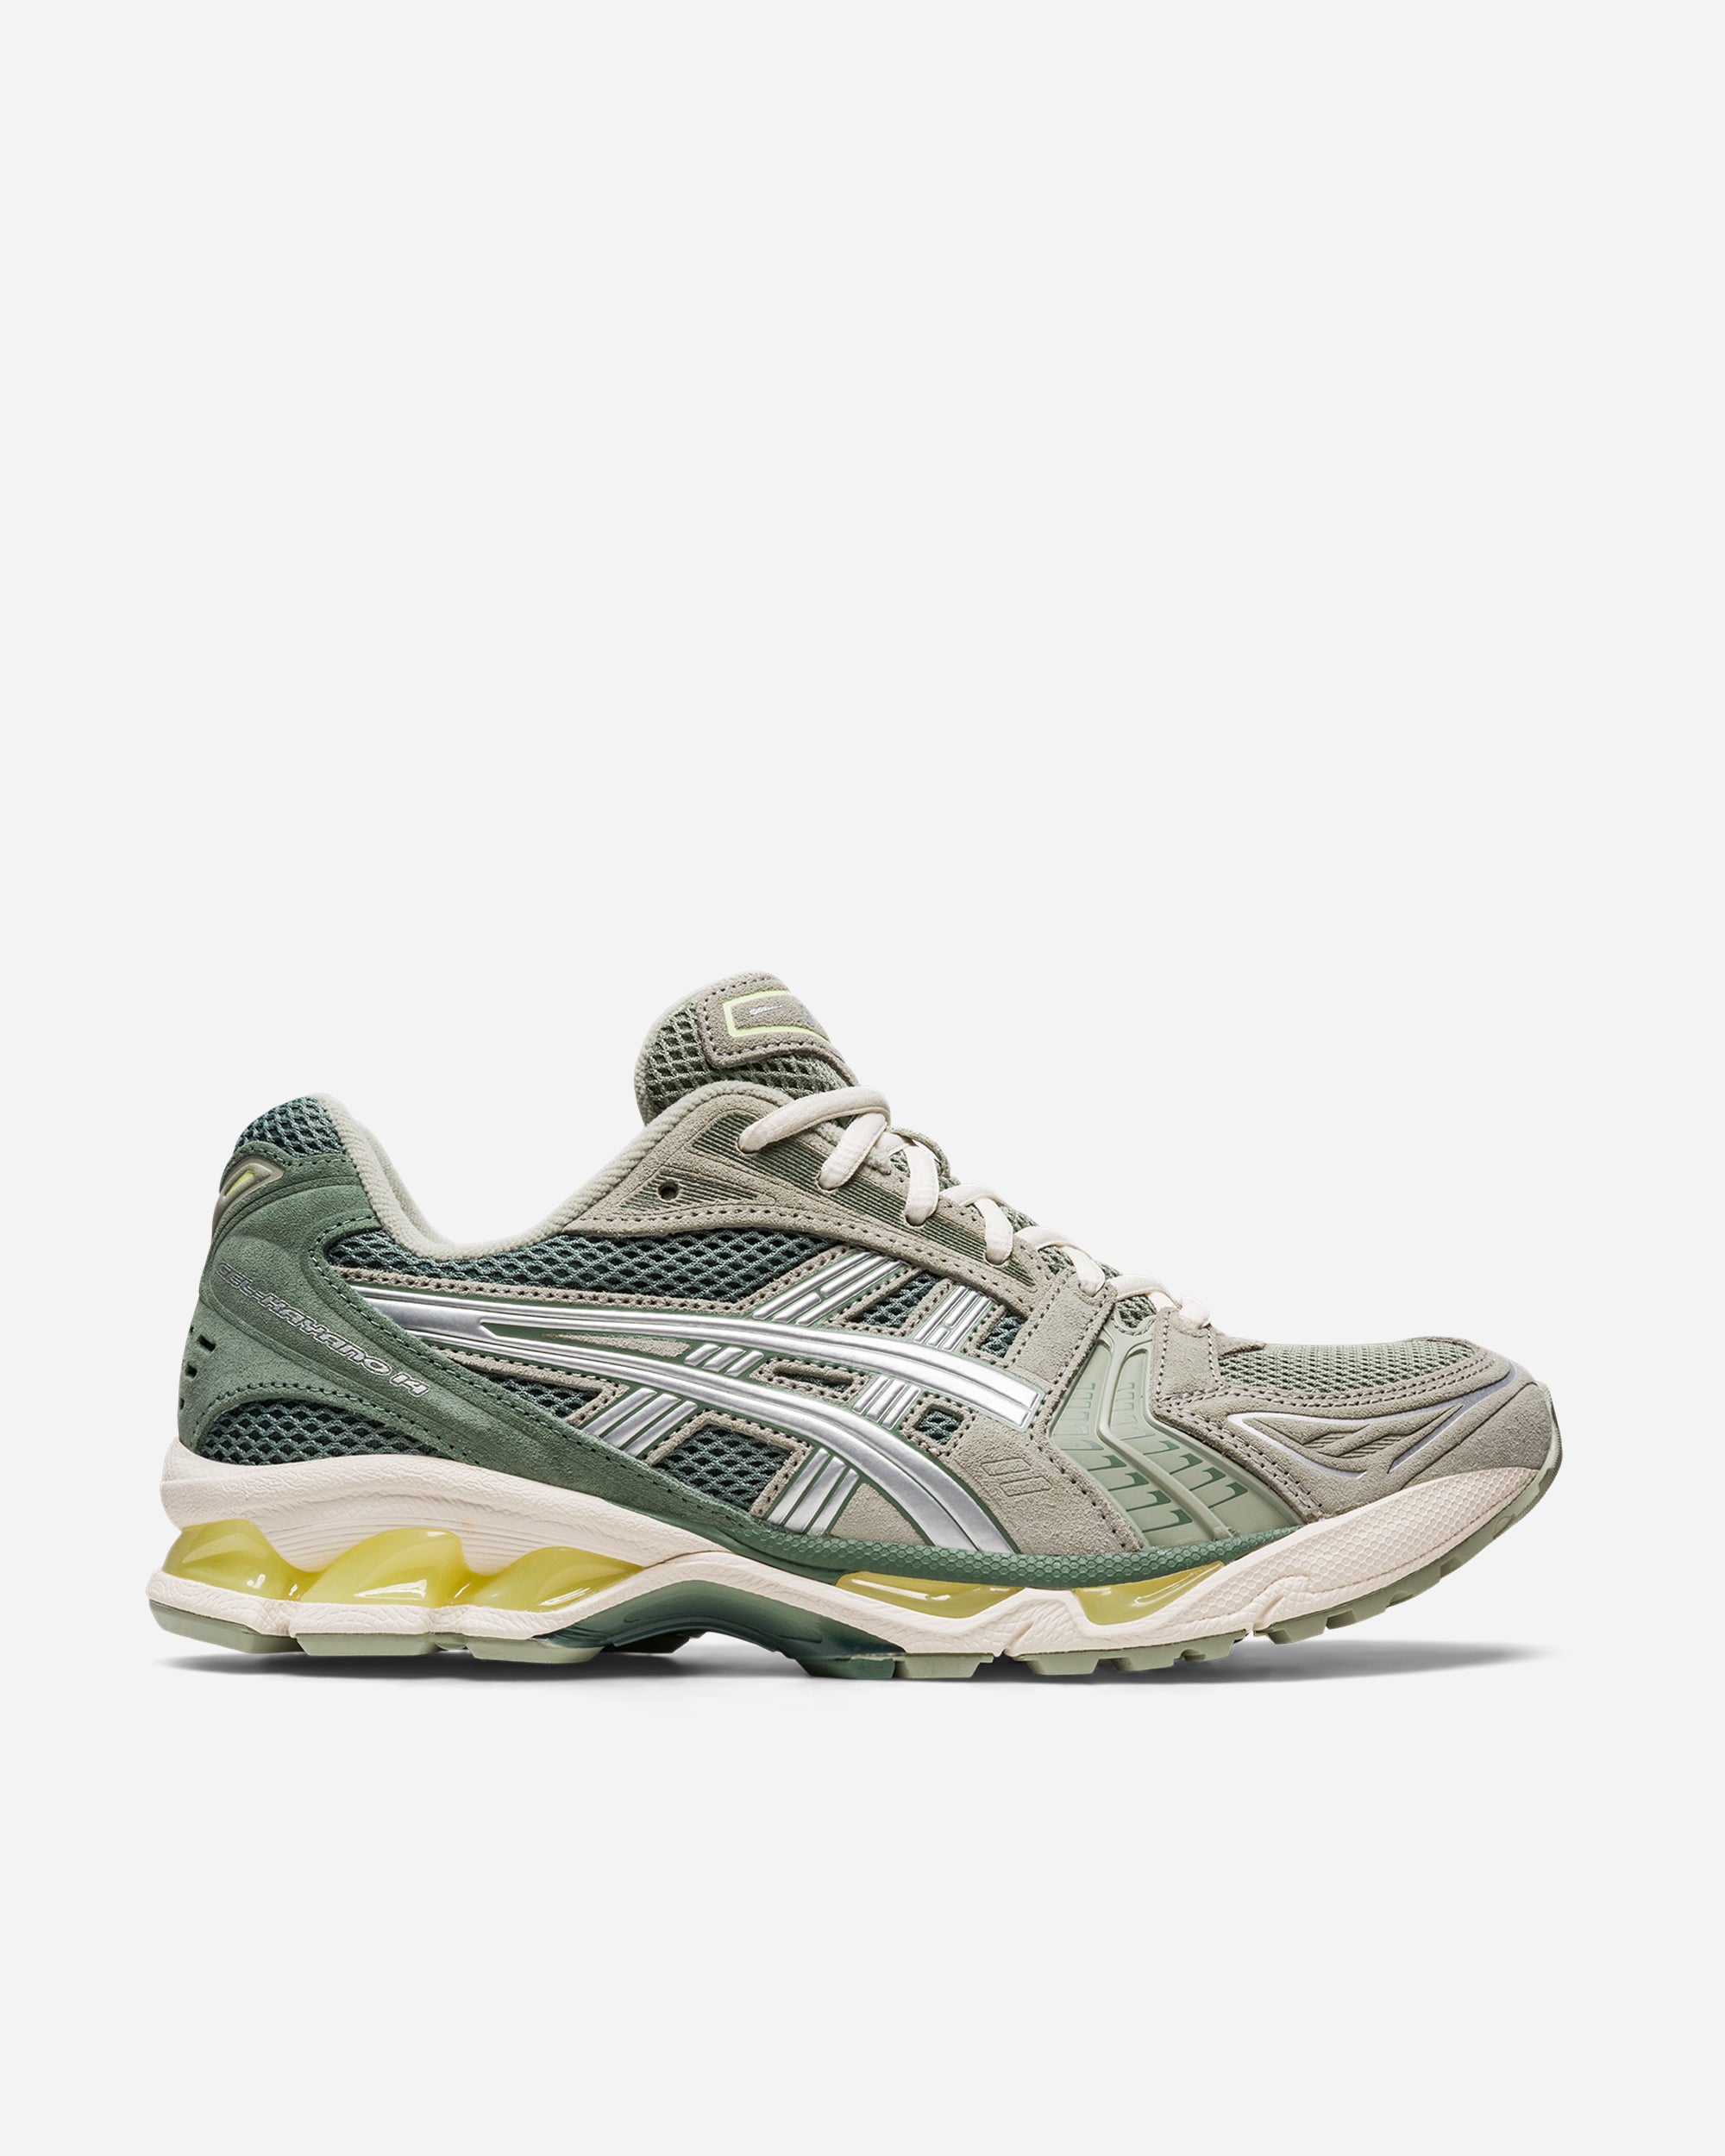 Asics GEL-Kayano 14 OLIVE GREY/PURE SILVER 1201A161-301